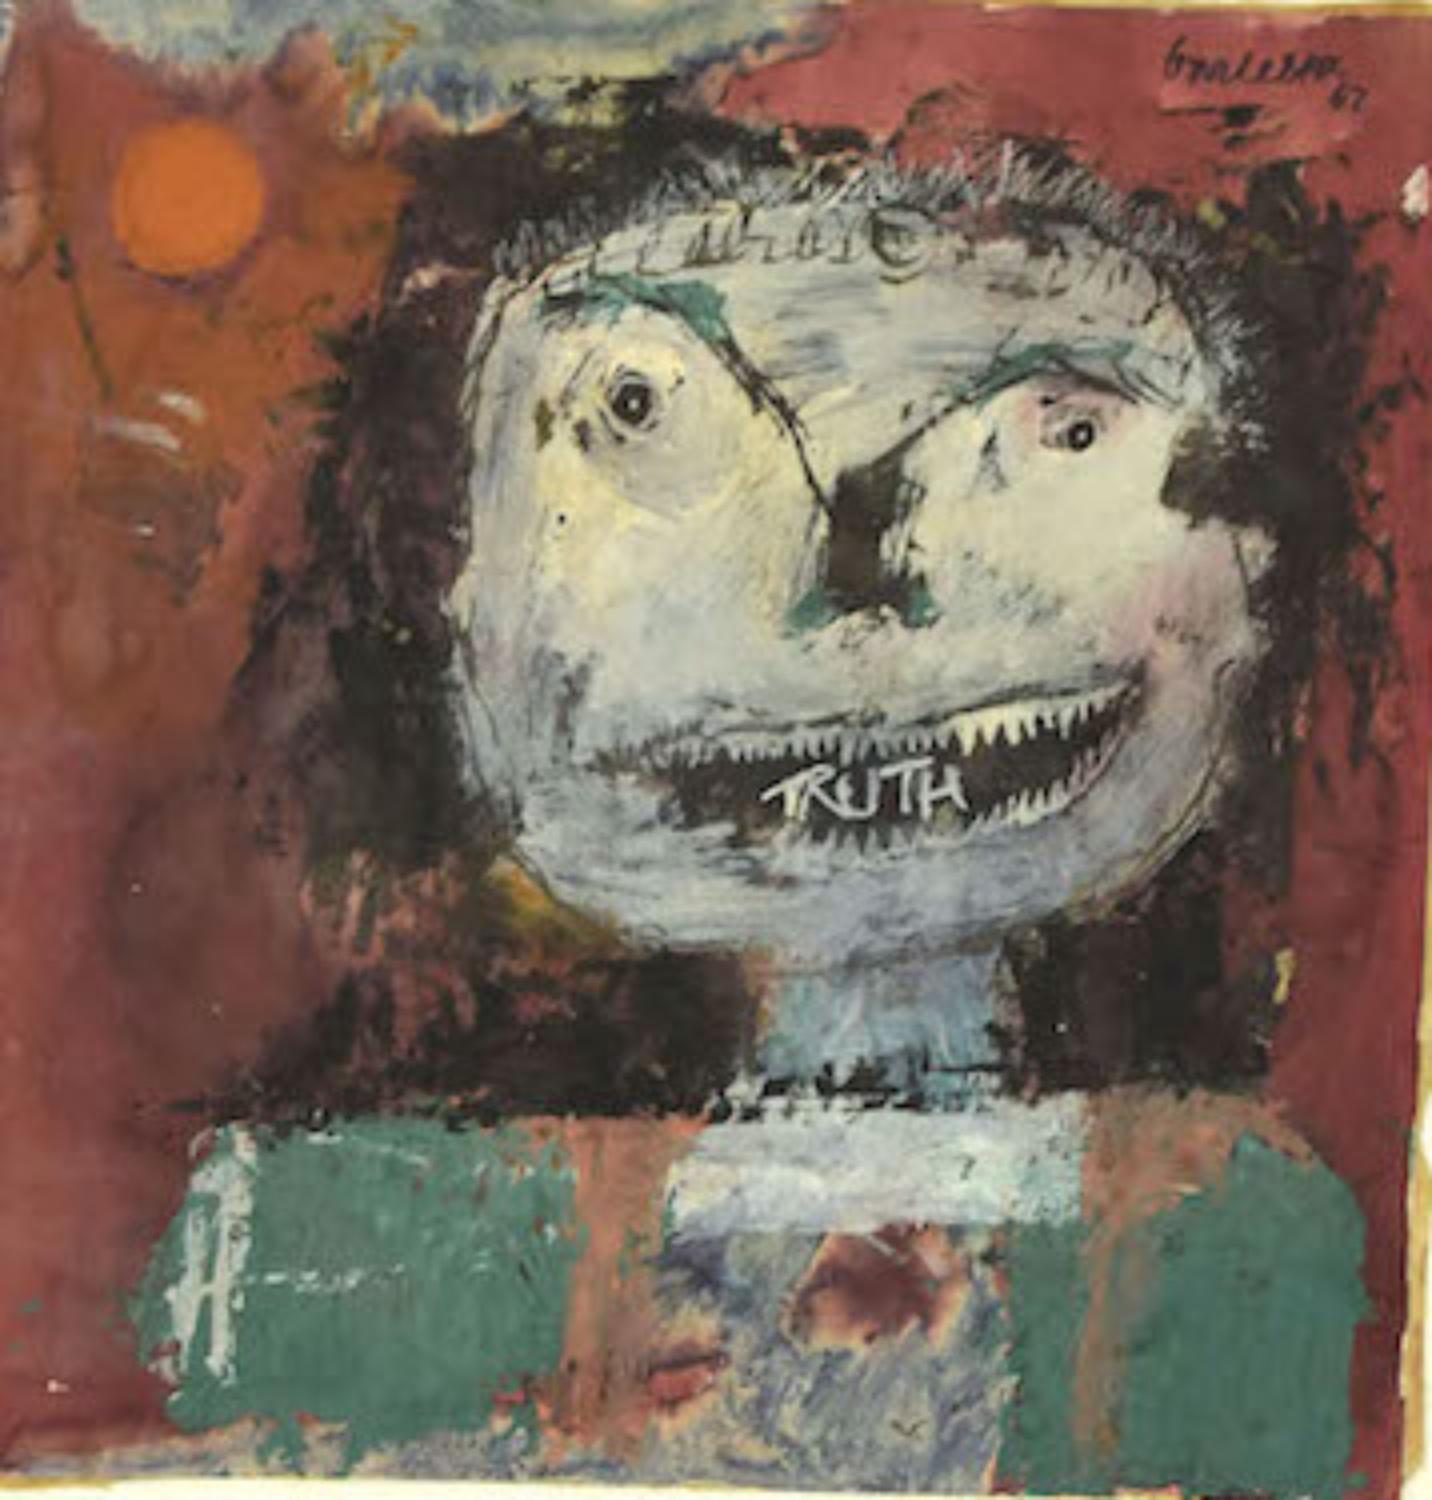 Truth is an original painting in mixed media, ink tempera and watercolor, realized by Sergio Barletta in 1962.

Applied on passepartout: 65 x 50 cm.

Hand-signed and dated at the top left.

Titled in the center.

In very good conditions, except for